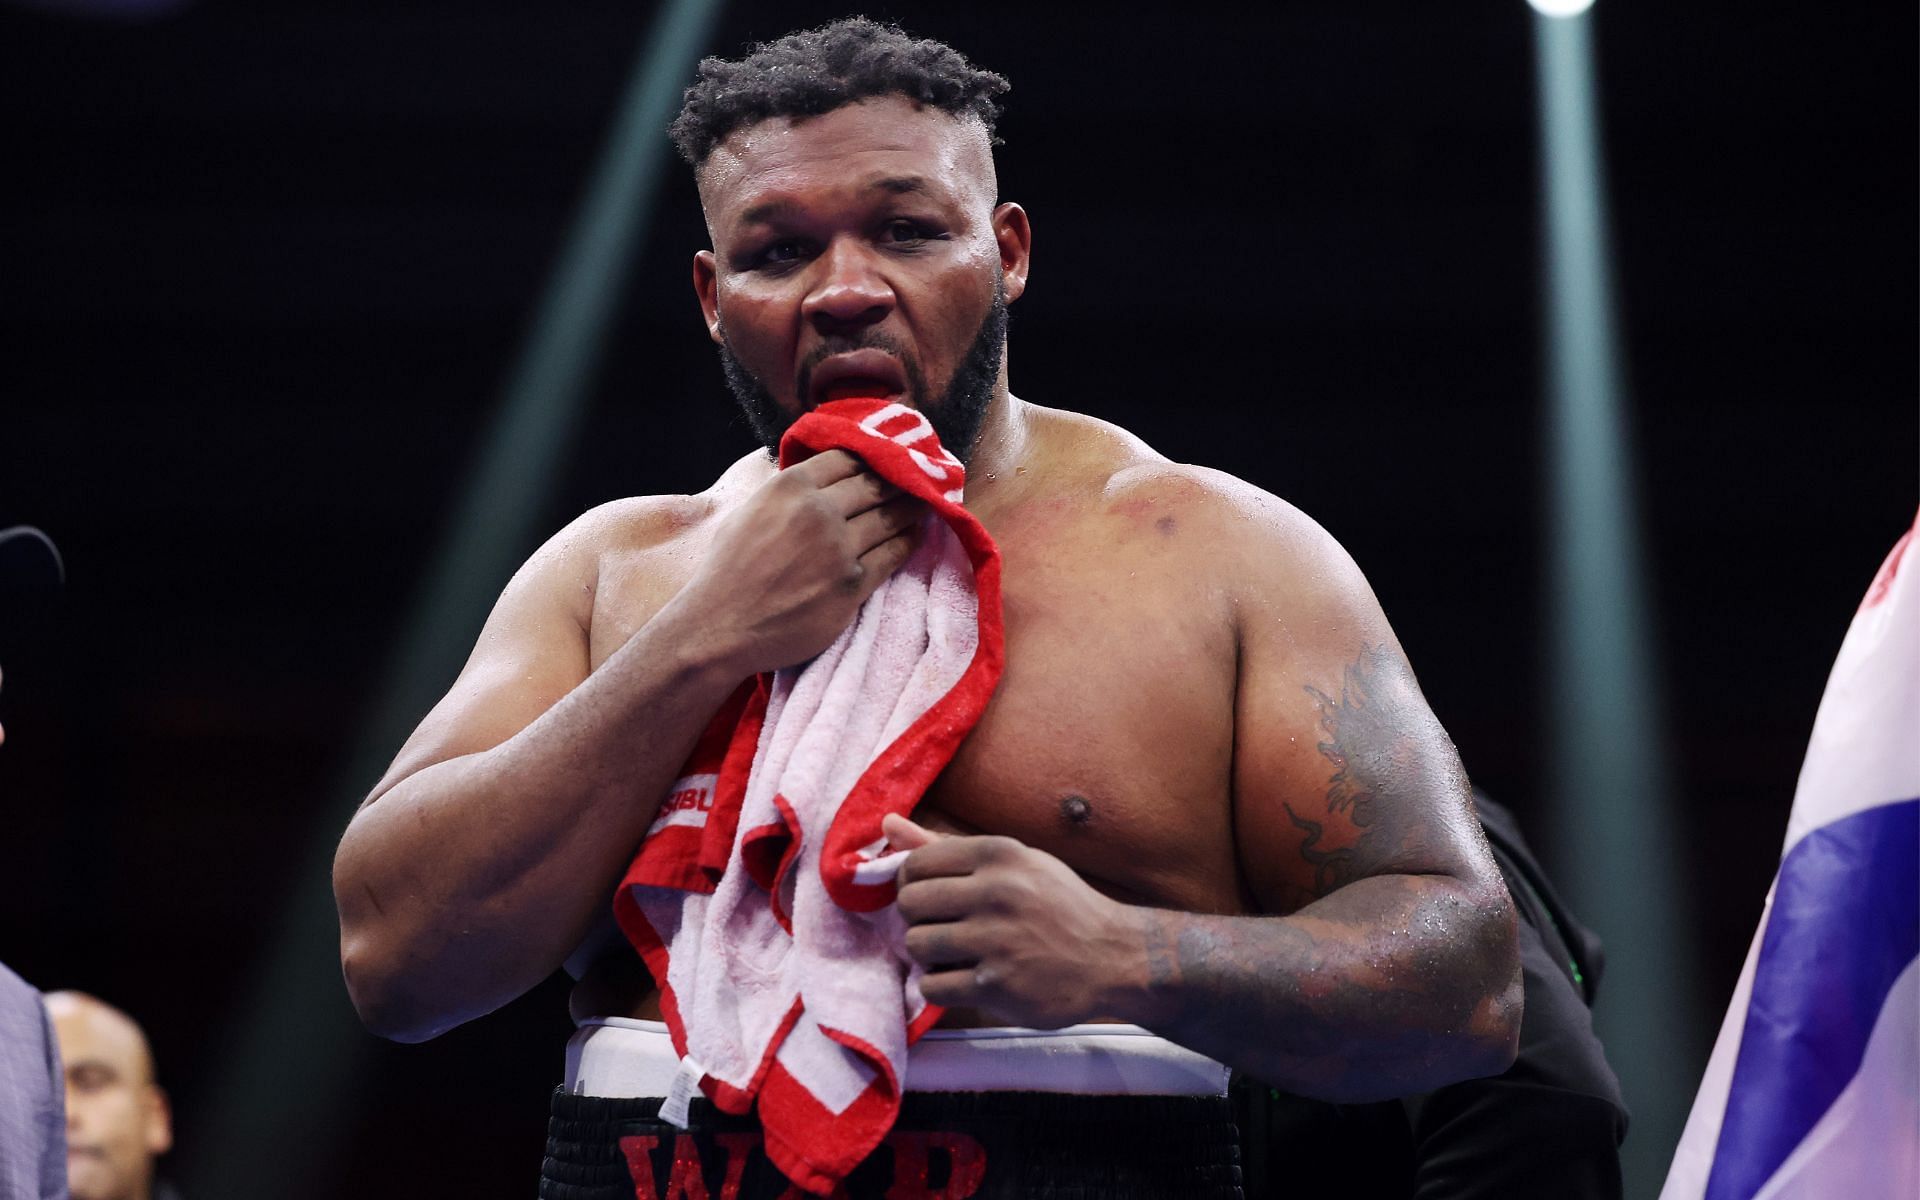 Jarrell Miller is coming off his first professional boxing defeat [Image courtesy: Getty Images]